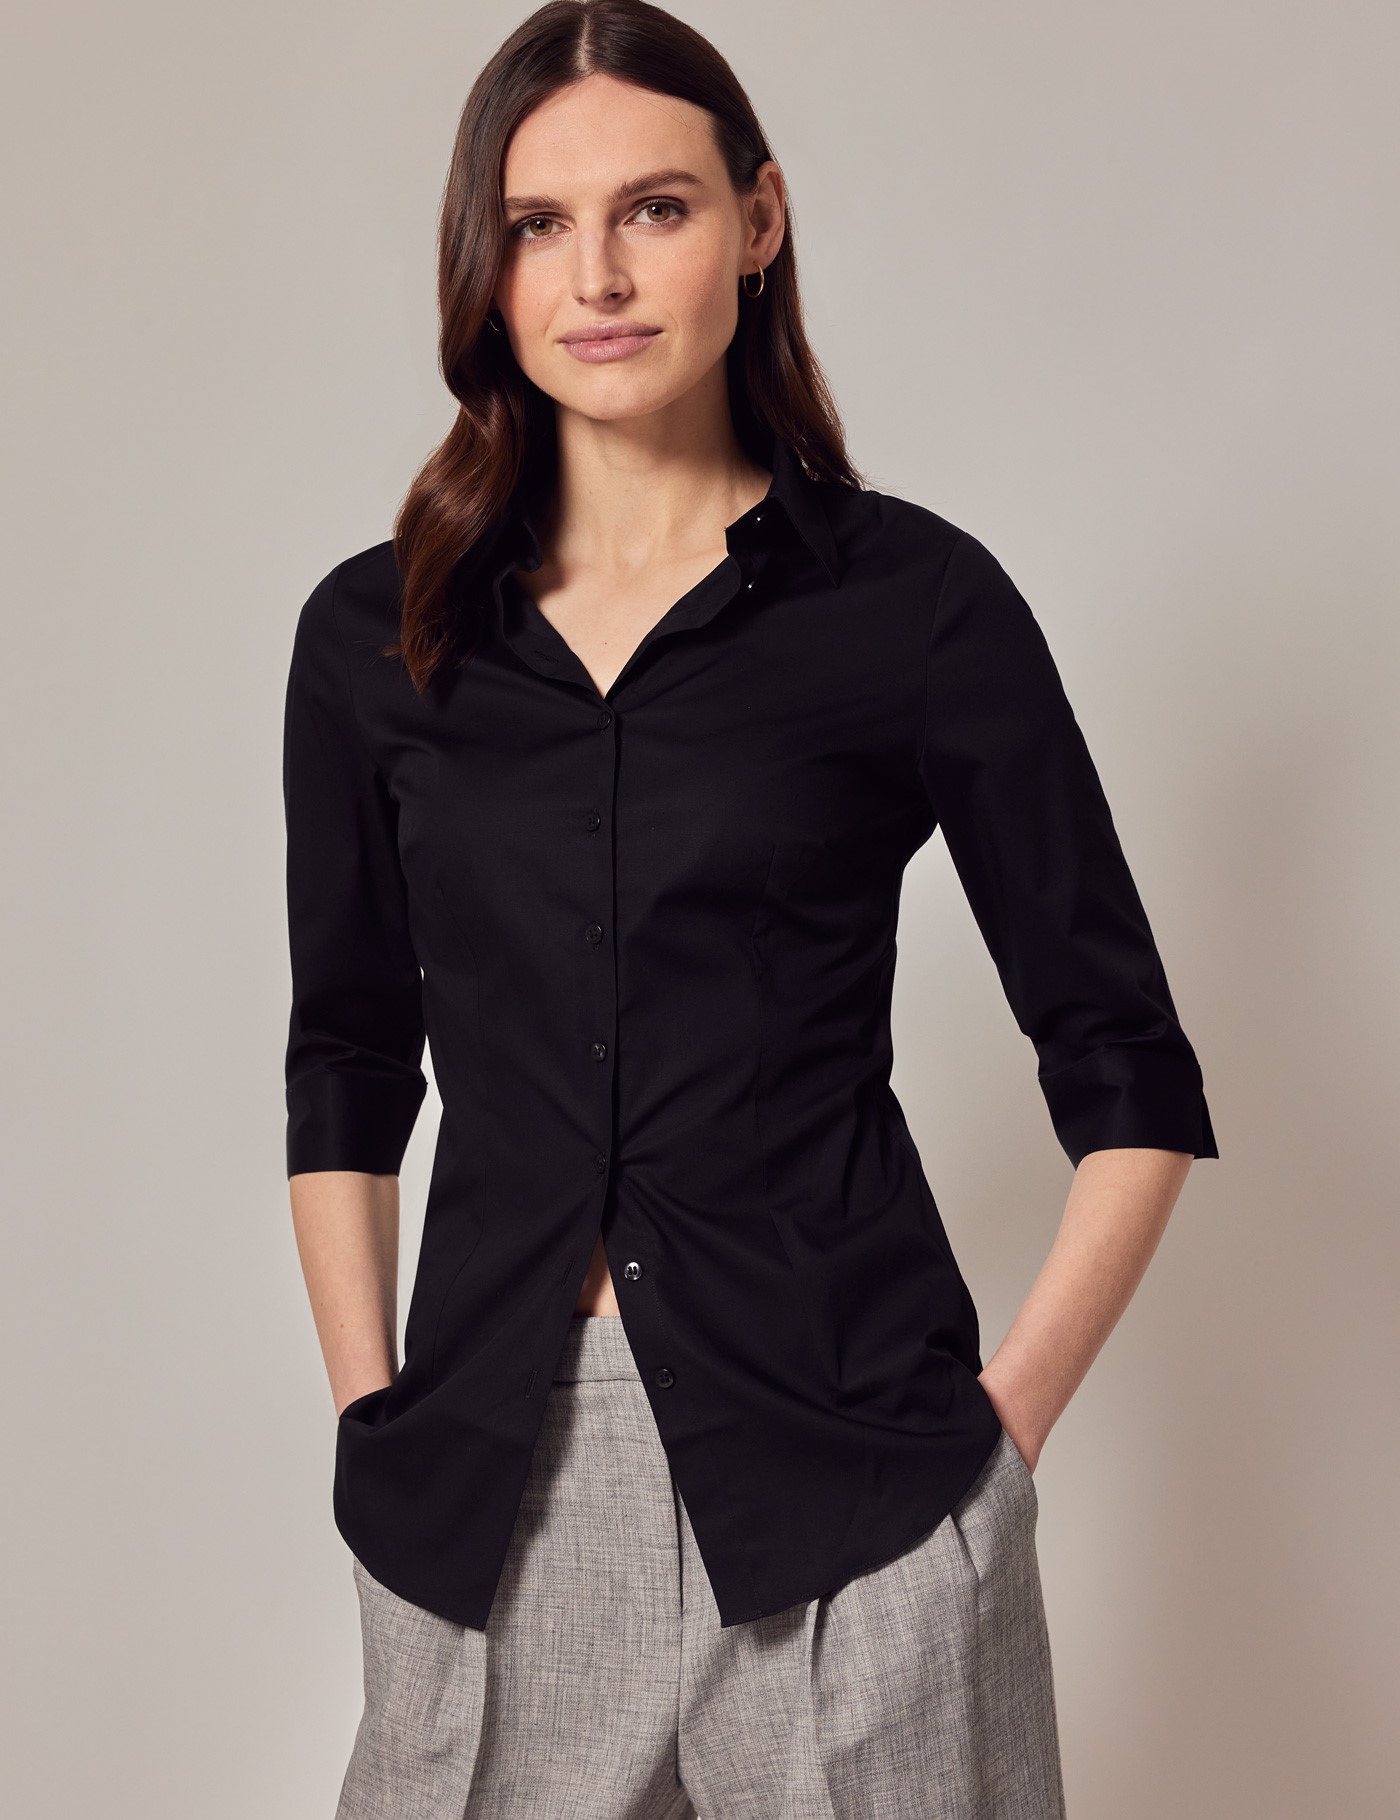 Black Cotton Zip Up Fitted Long Sleeve Top